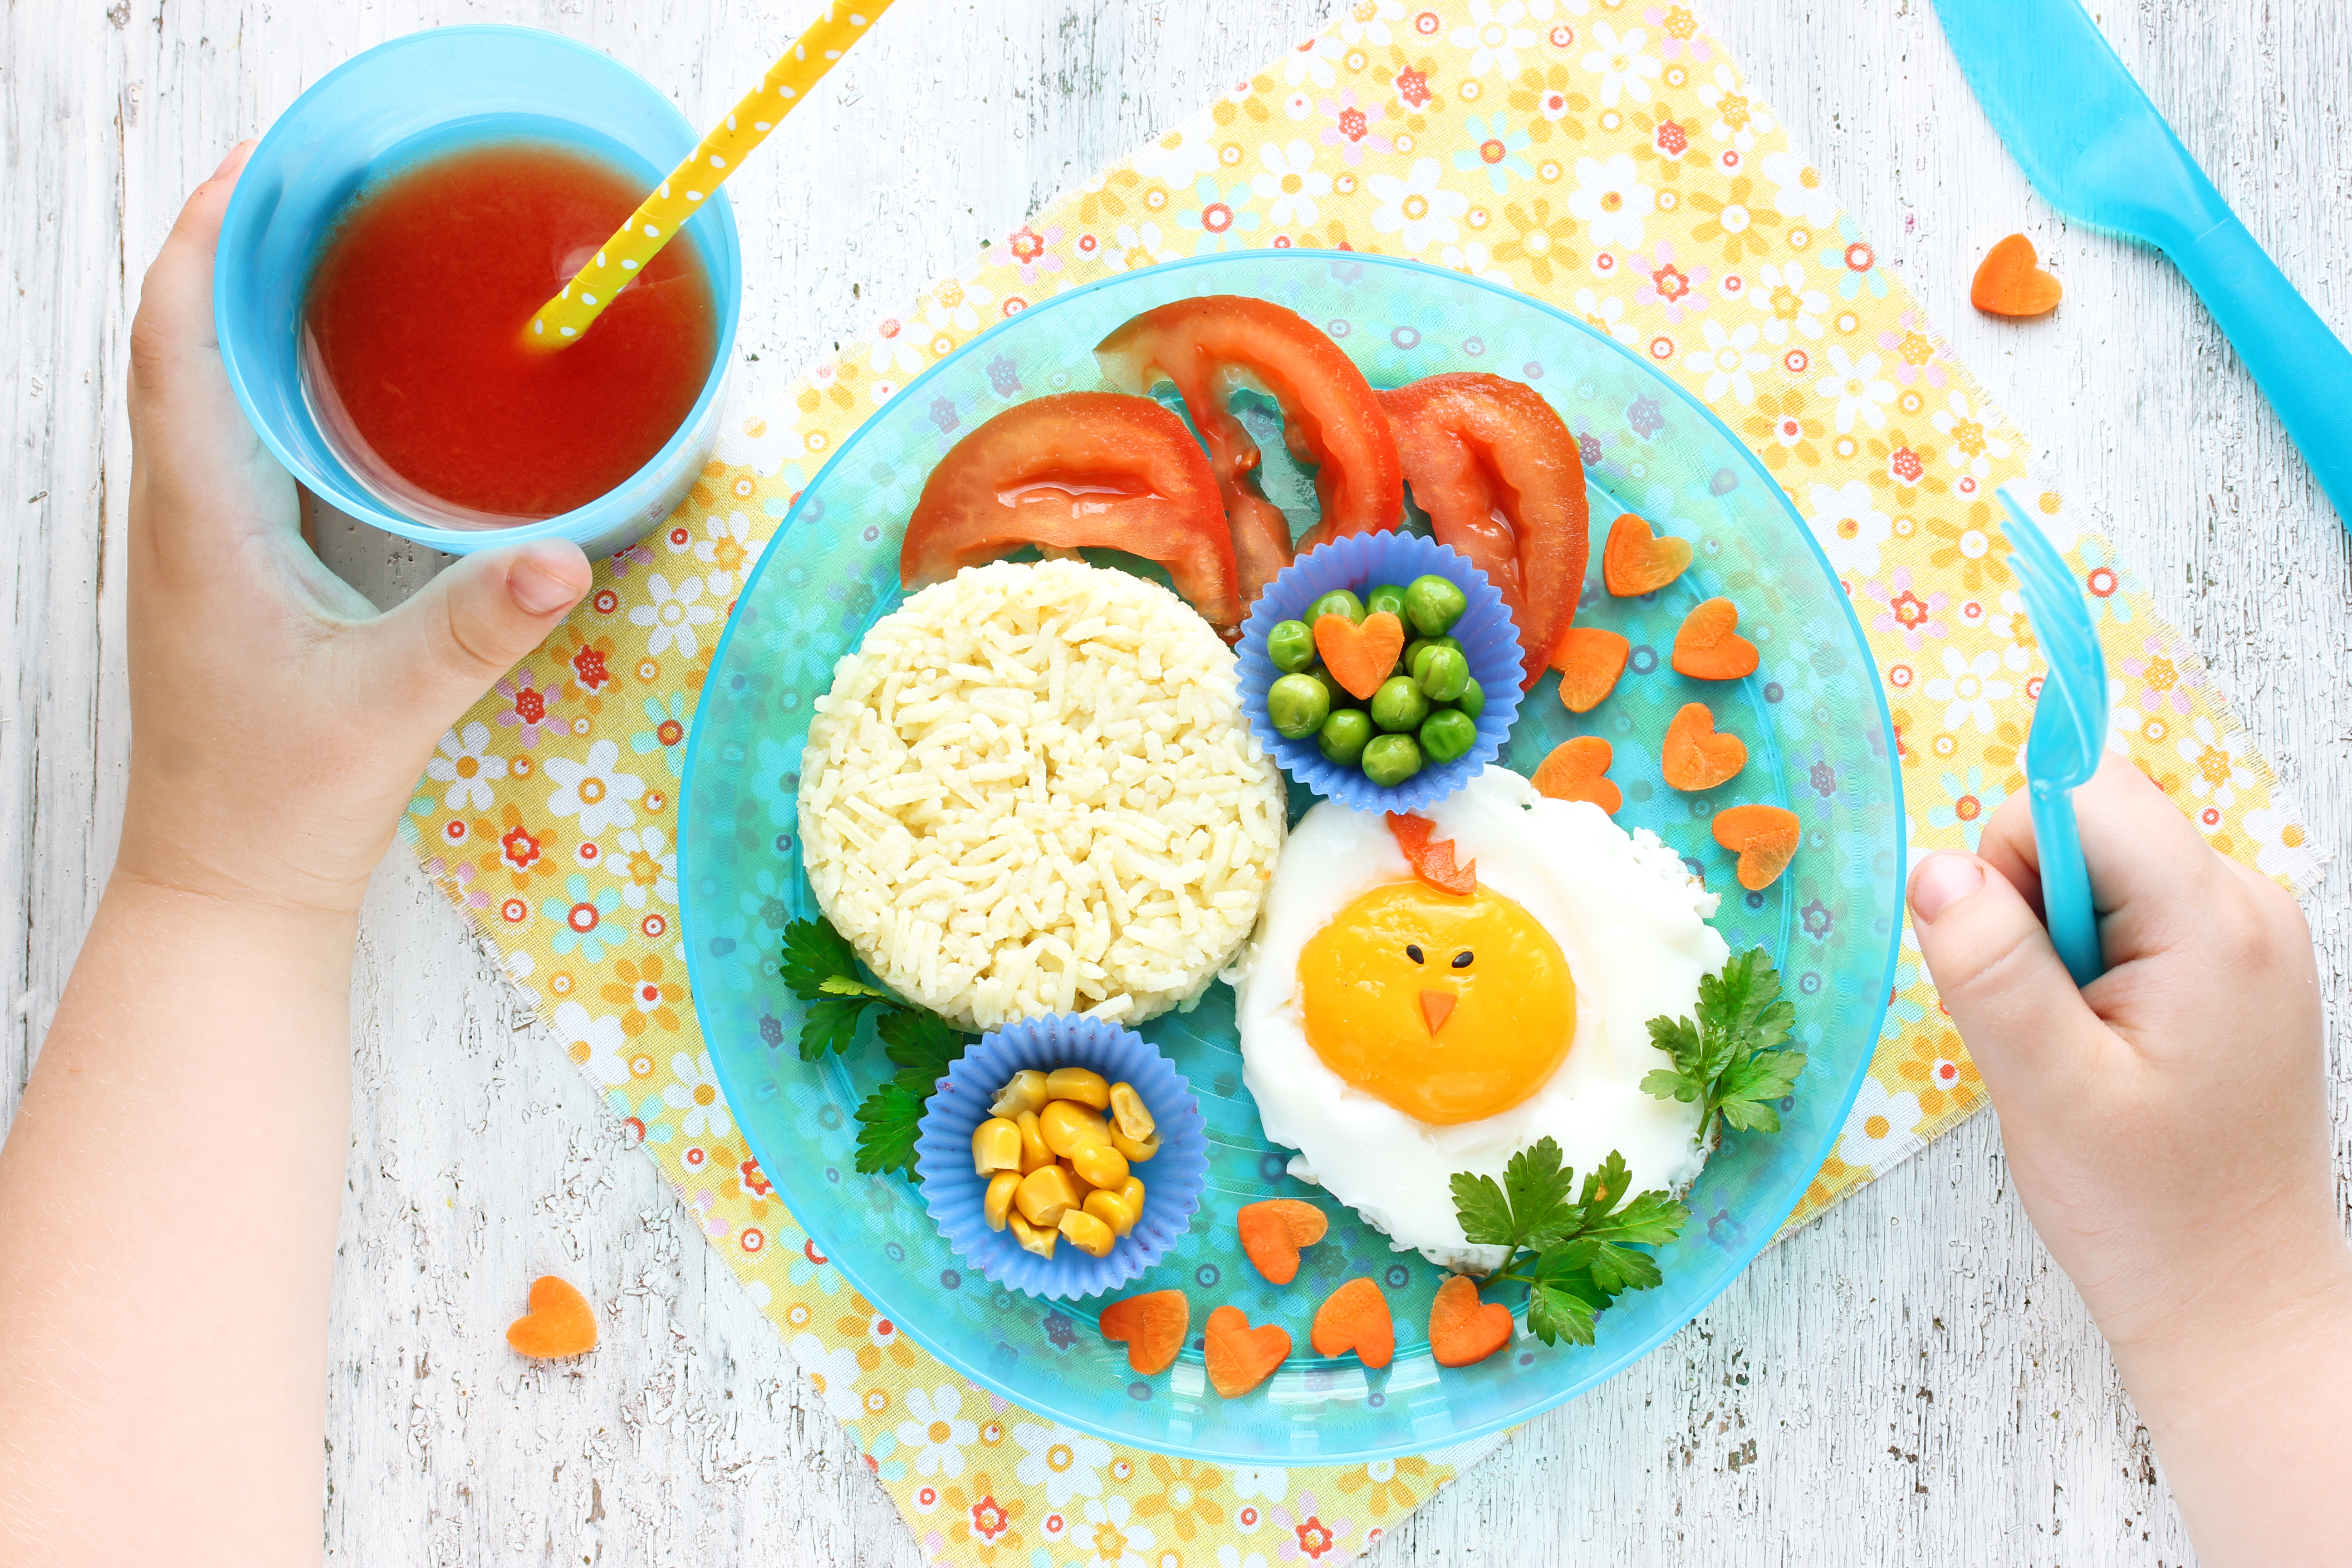 A plate plate of rice, corn, peas, tomatoes, carrots cut into heart shapes, and a sunnyside-up egg. The plate is next to a childs hand holding a red beverage.